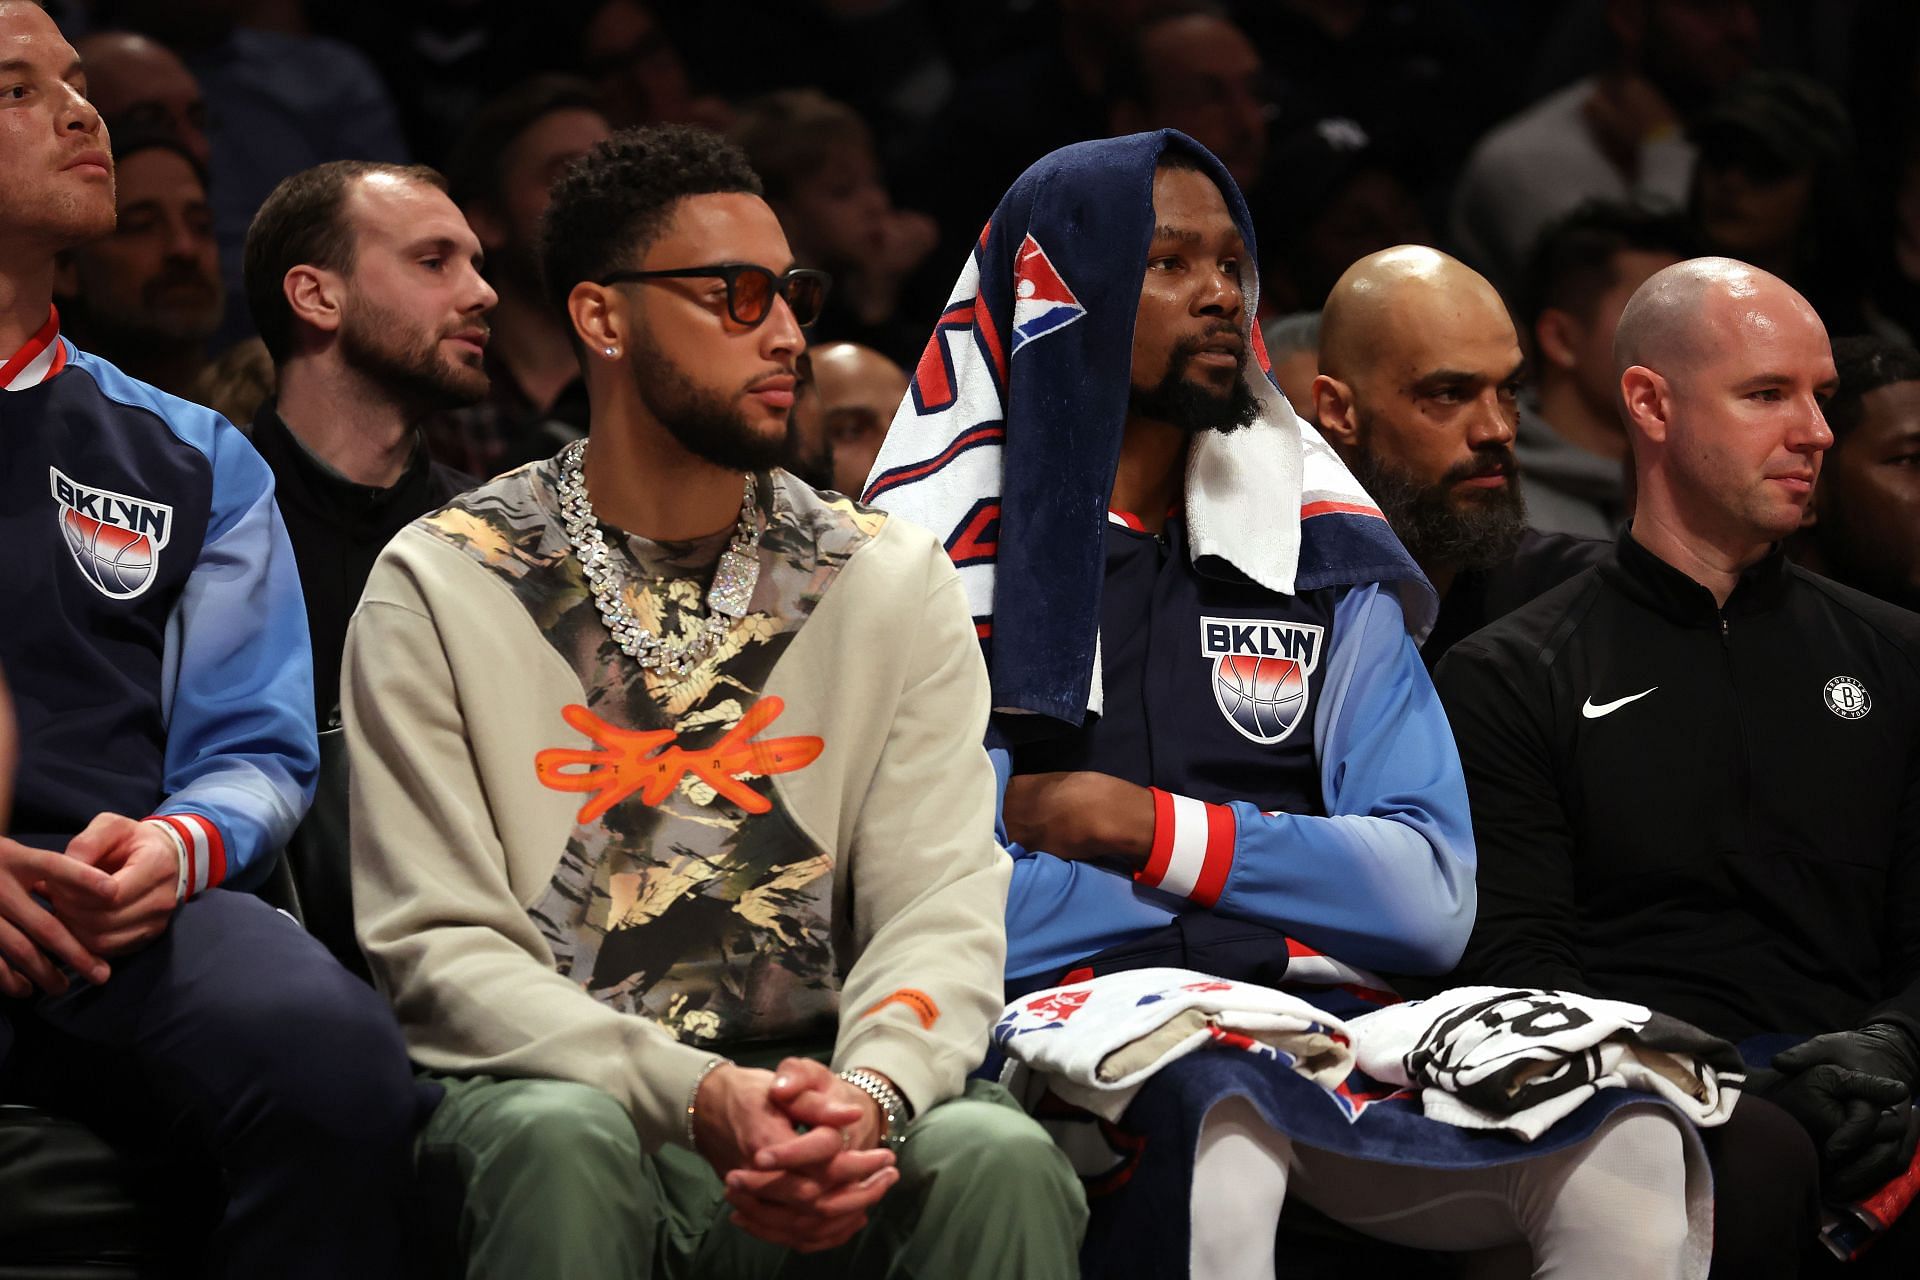 Ben Simmons watches the game alongside teammate Kevin Durant